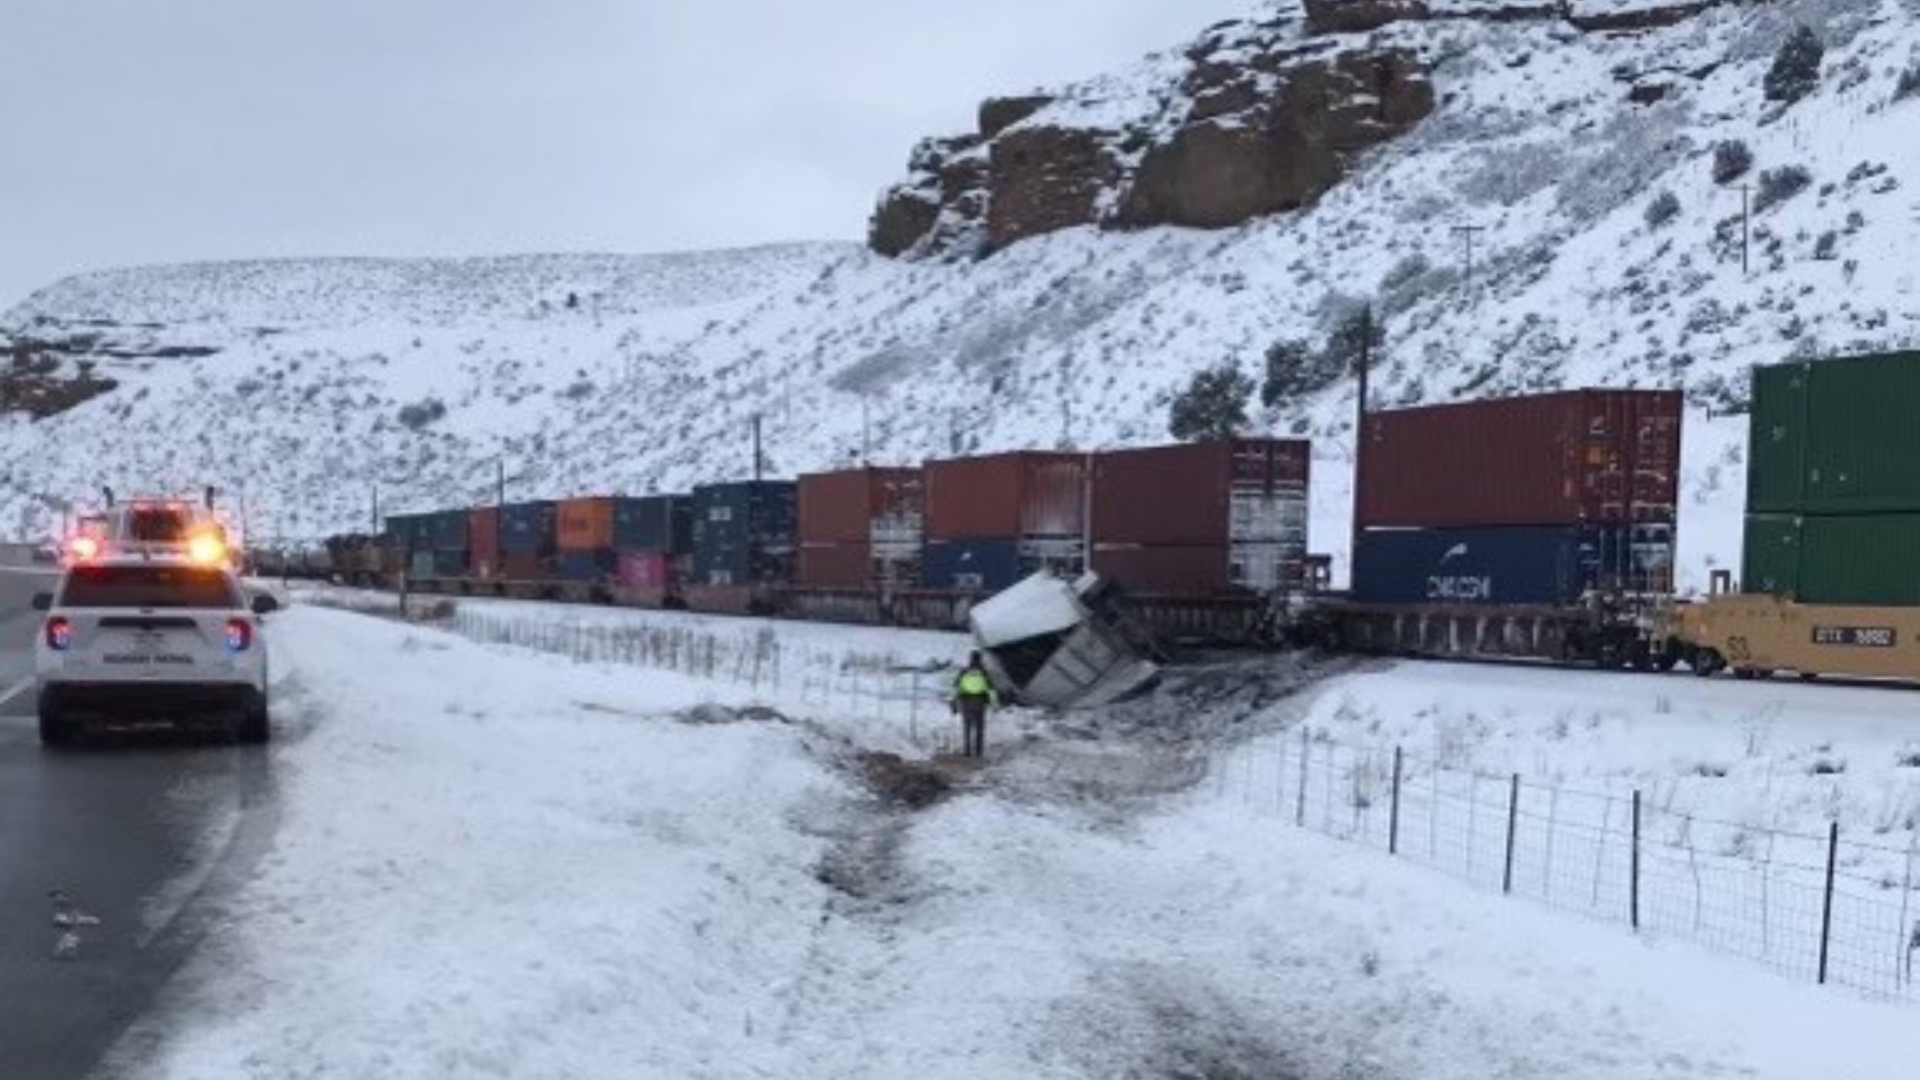 The Utah Highway Patrol said the semi-truck went off the roadway and stopped on the train tracks....